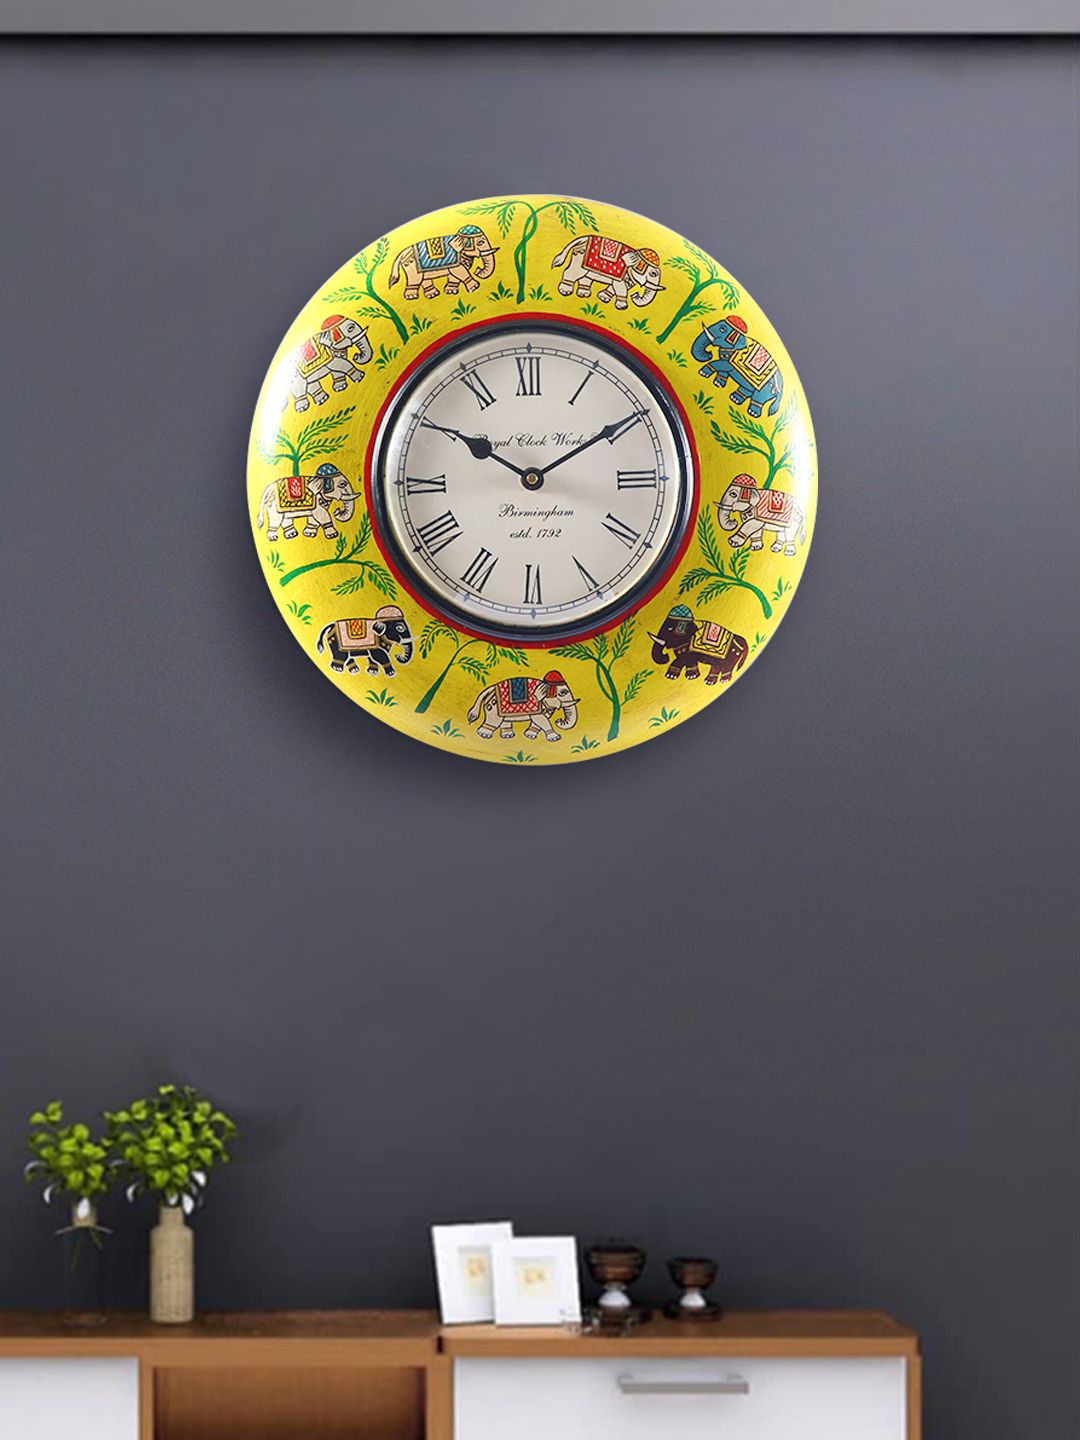 Aapno Rajasthan Yellow & Blue Printed Traditional Wall Clock Price in India